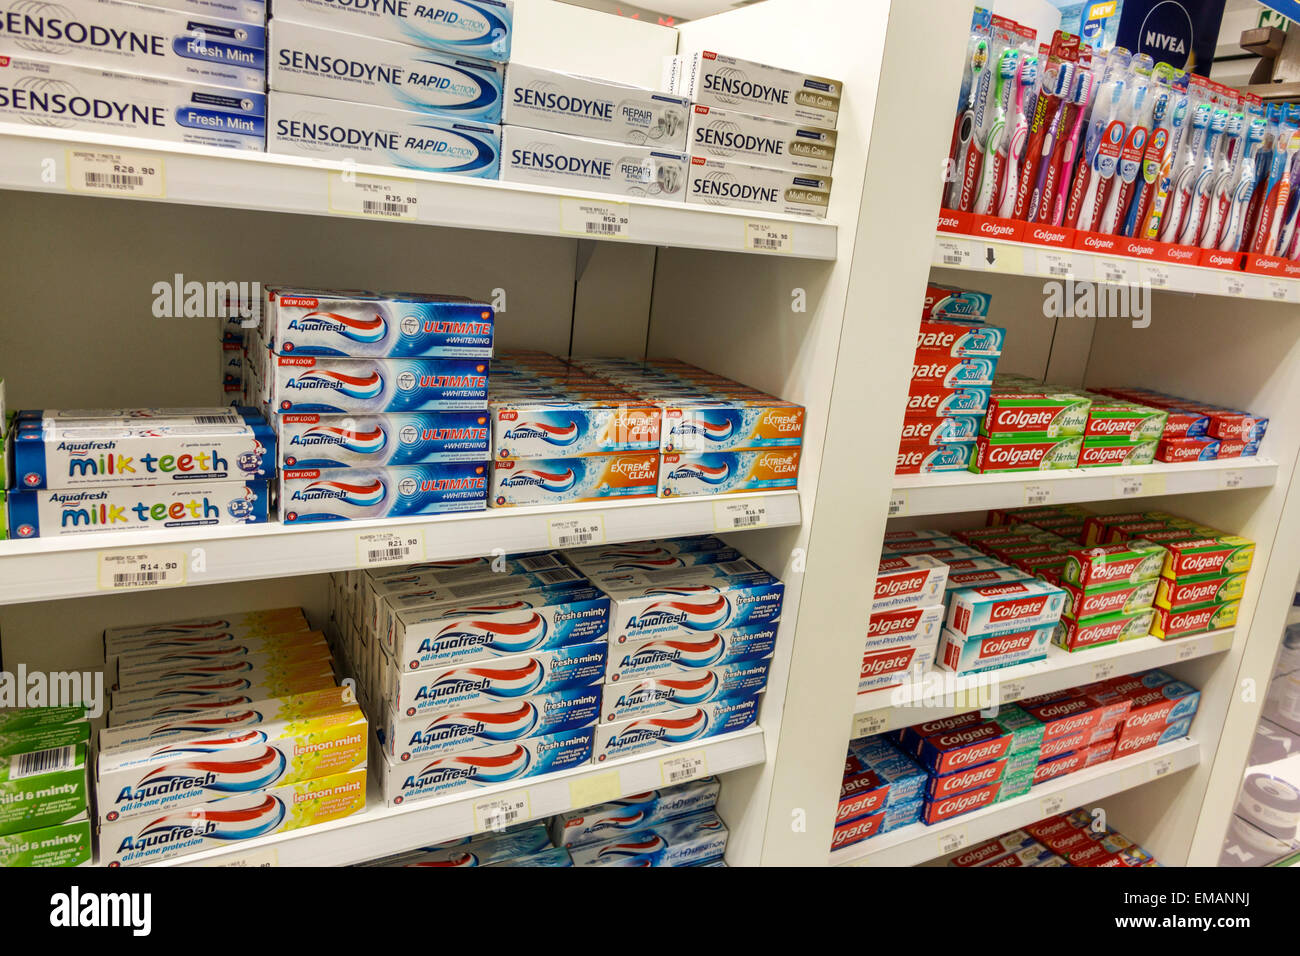 Johannesburg South Africa,African O. R. Tambo International Airport,terminal,gate,pharmacy,drugstore,toothpaste,Sensodyne,Aquafresh,product products d Stock Photo